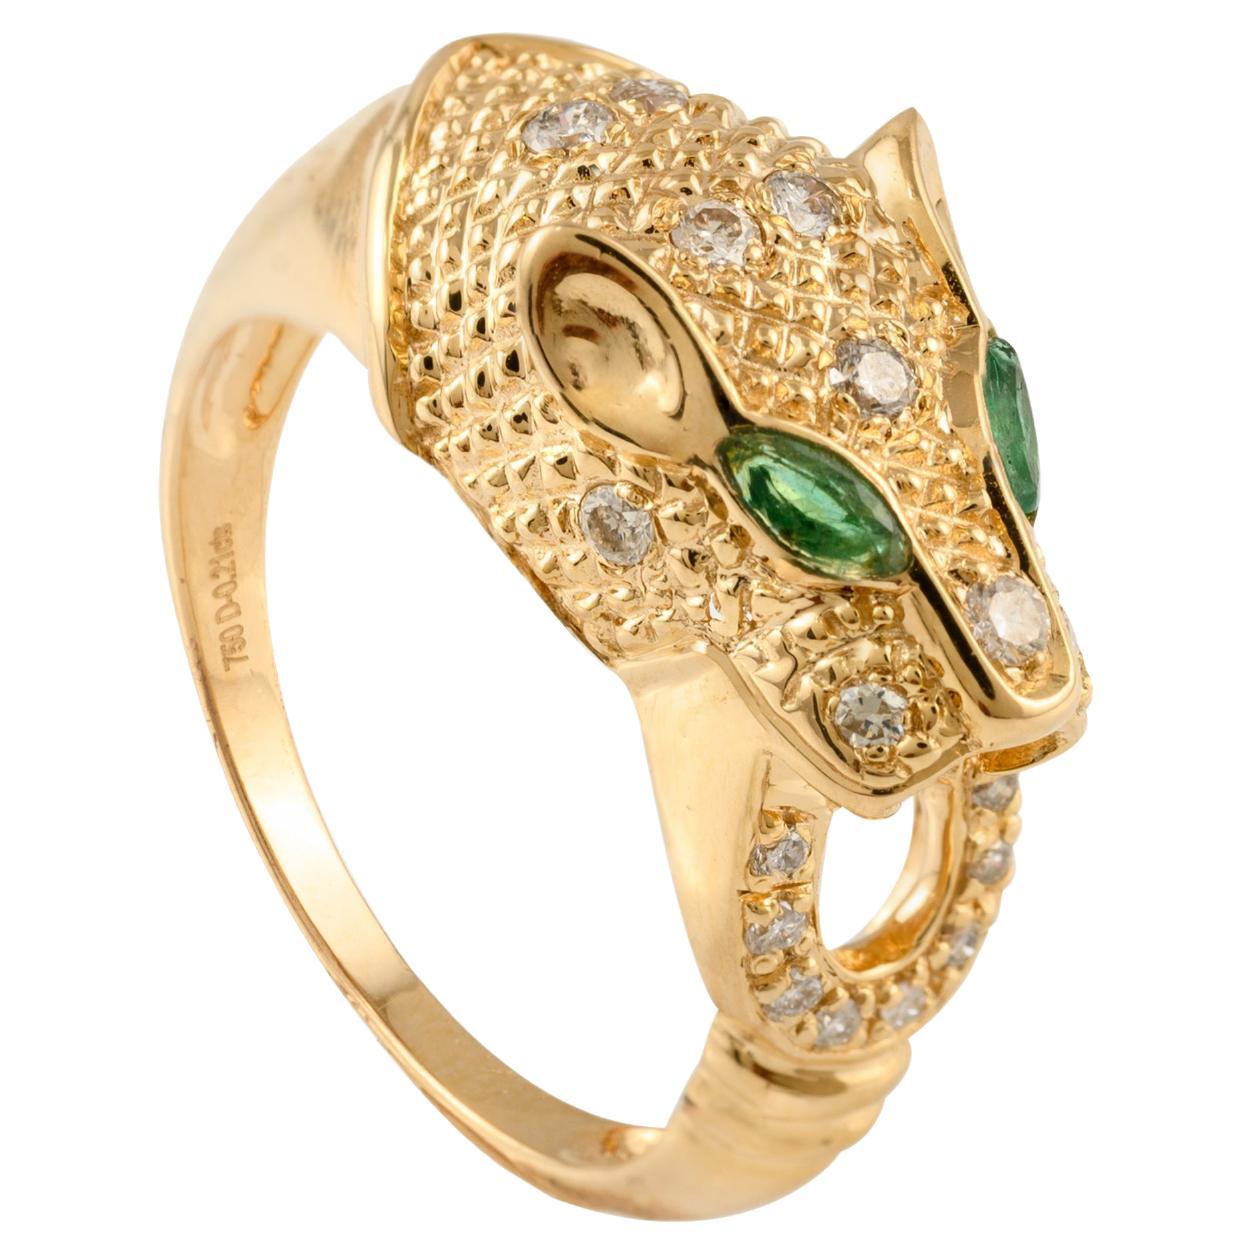 Vintage Panther Head Cocktail Ring Crafted in 18k Solid Yellow Gold